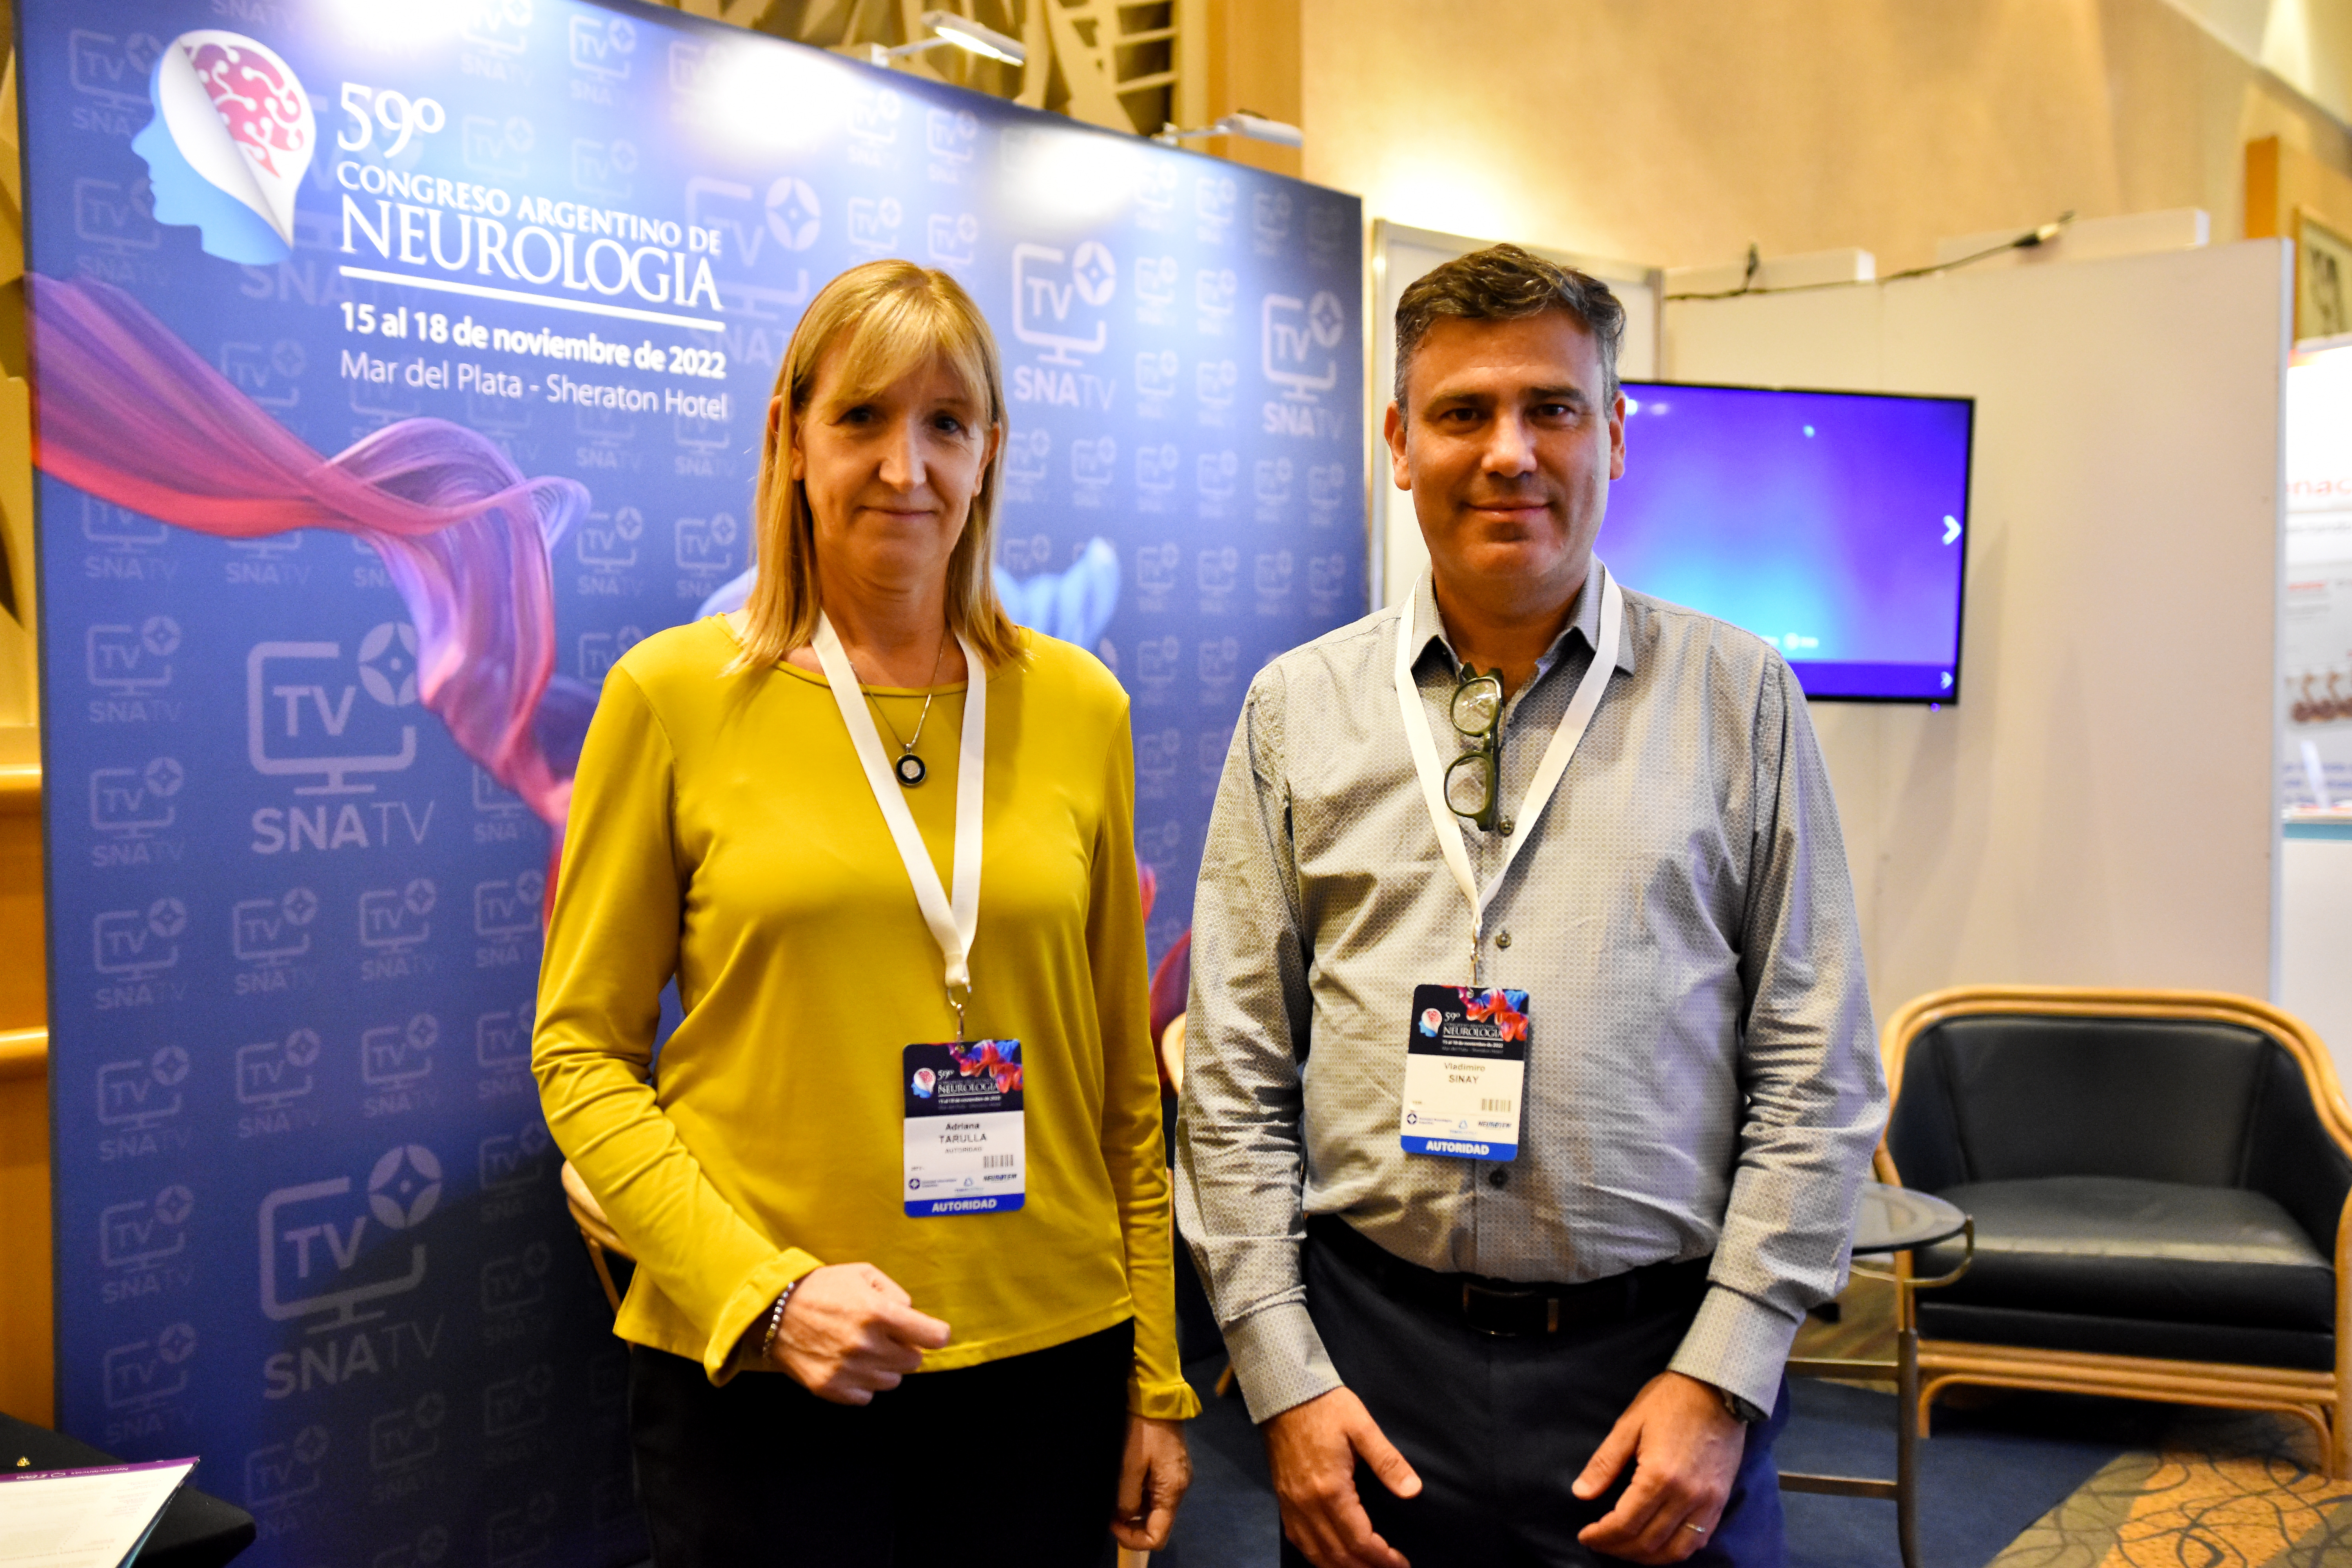 The Chair Of The Scientific Committee Of The Congress, Adriana Tarulla, And Its Vice-Chairman, Vladimiro Caine. 